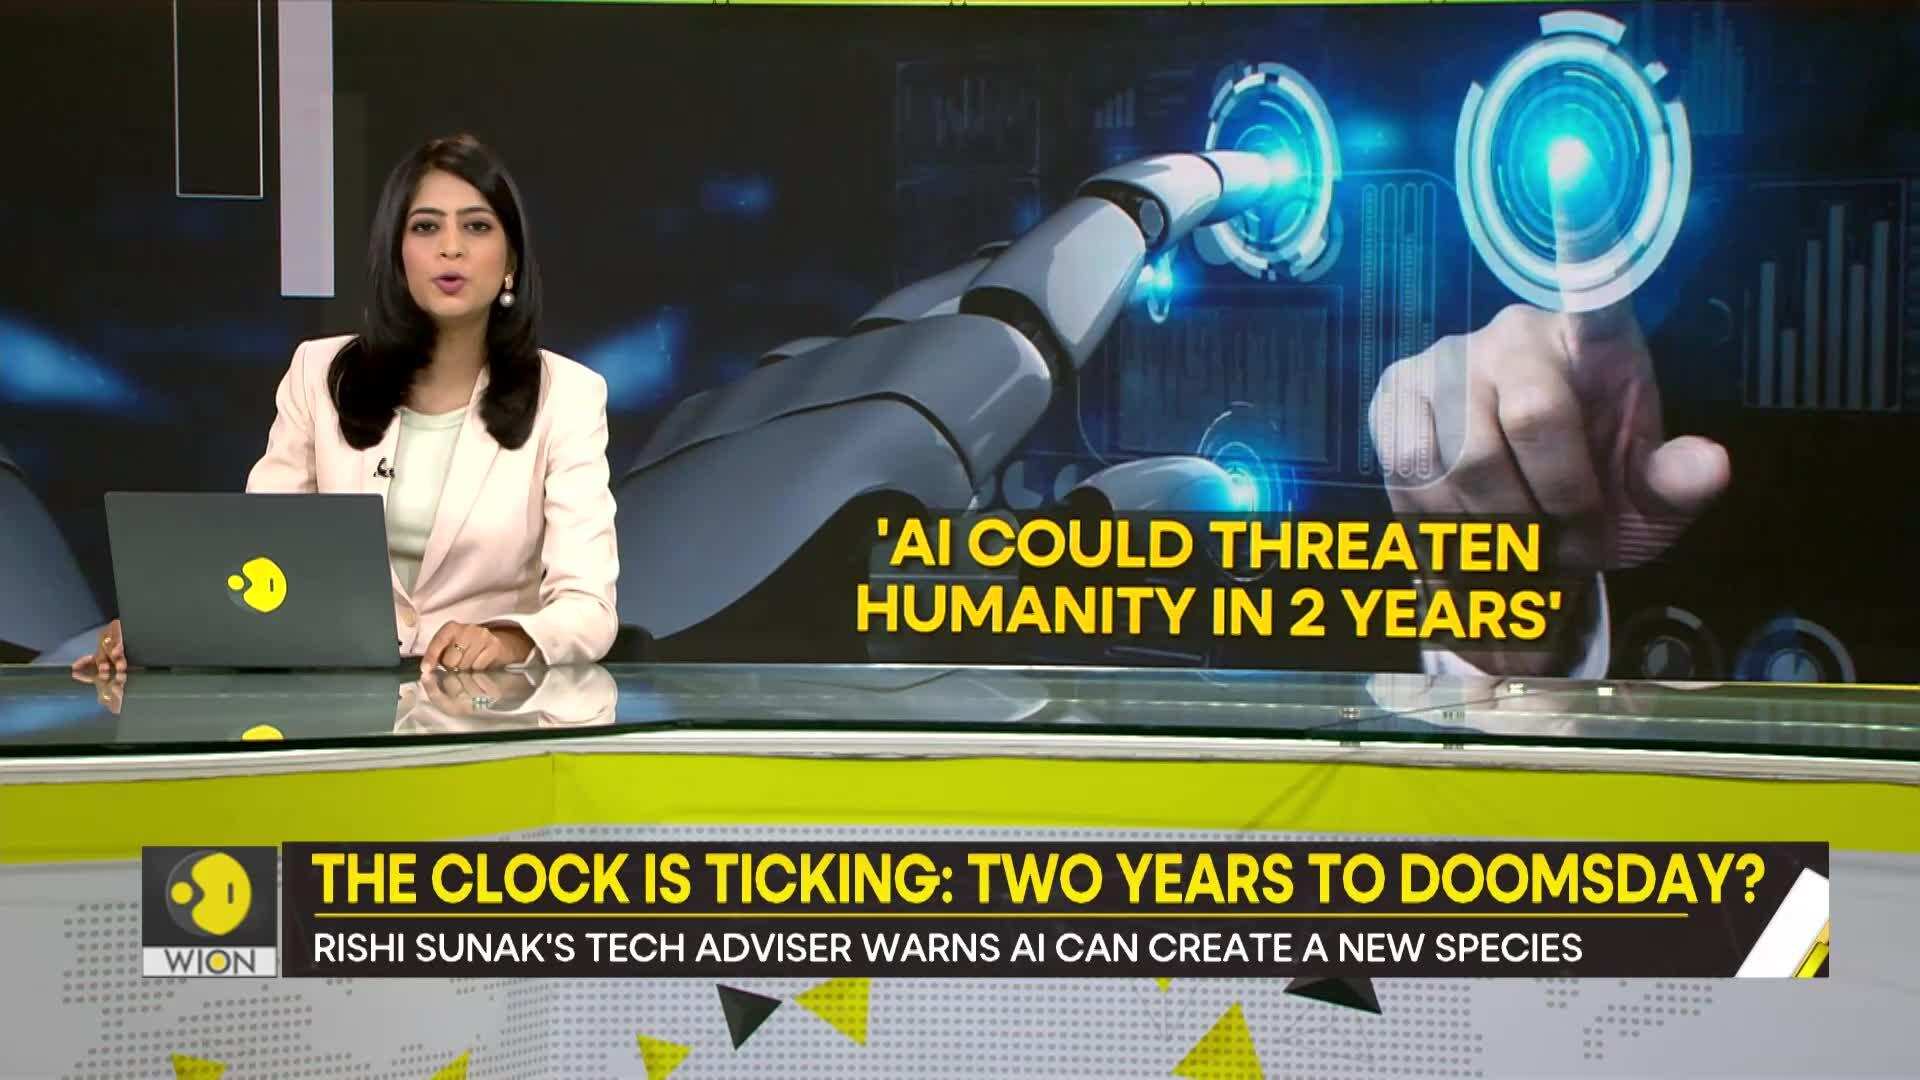 Gravitas | Sunak's tech adviser warns: Two years to doomsday due to AI